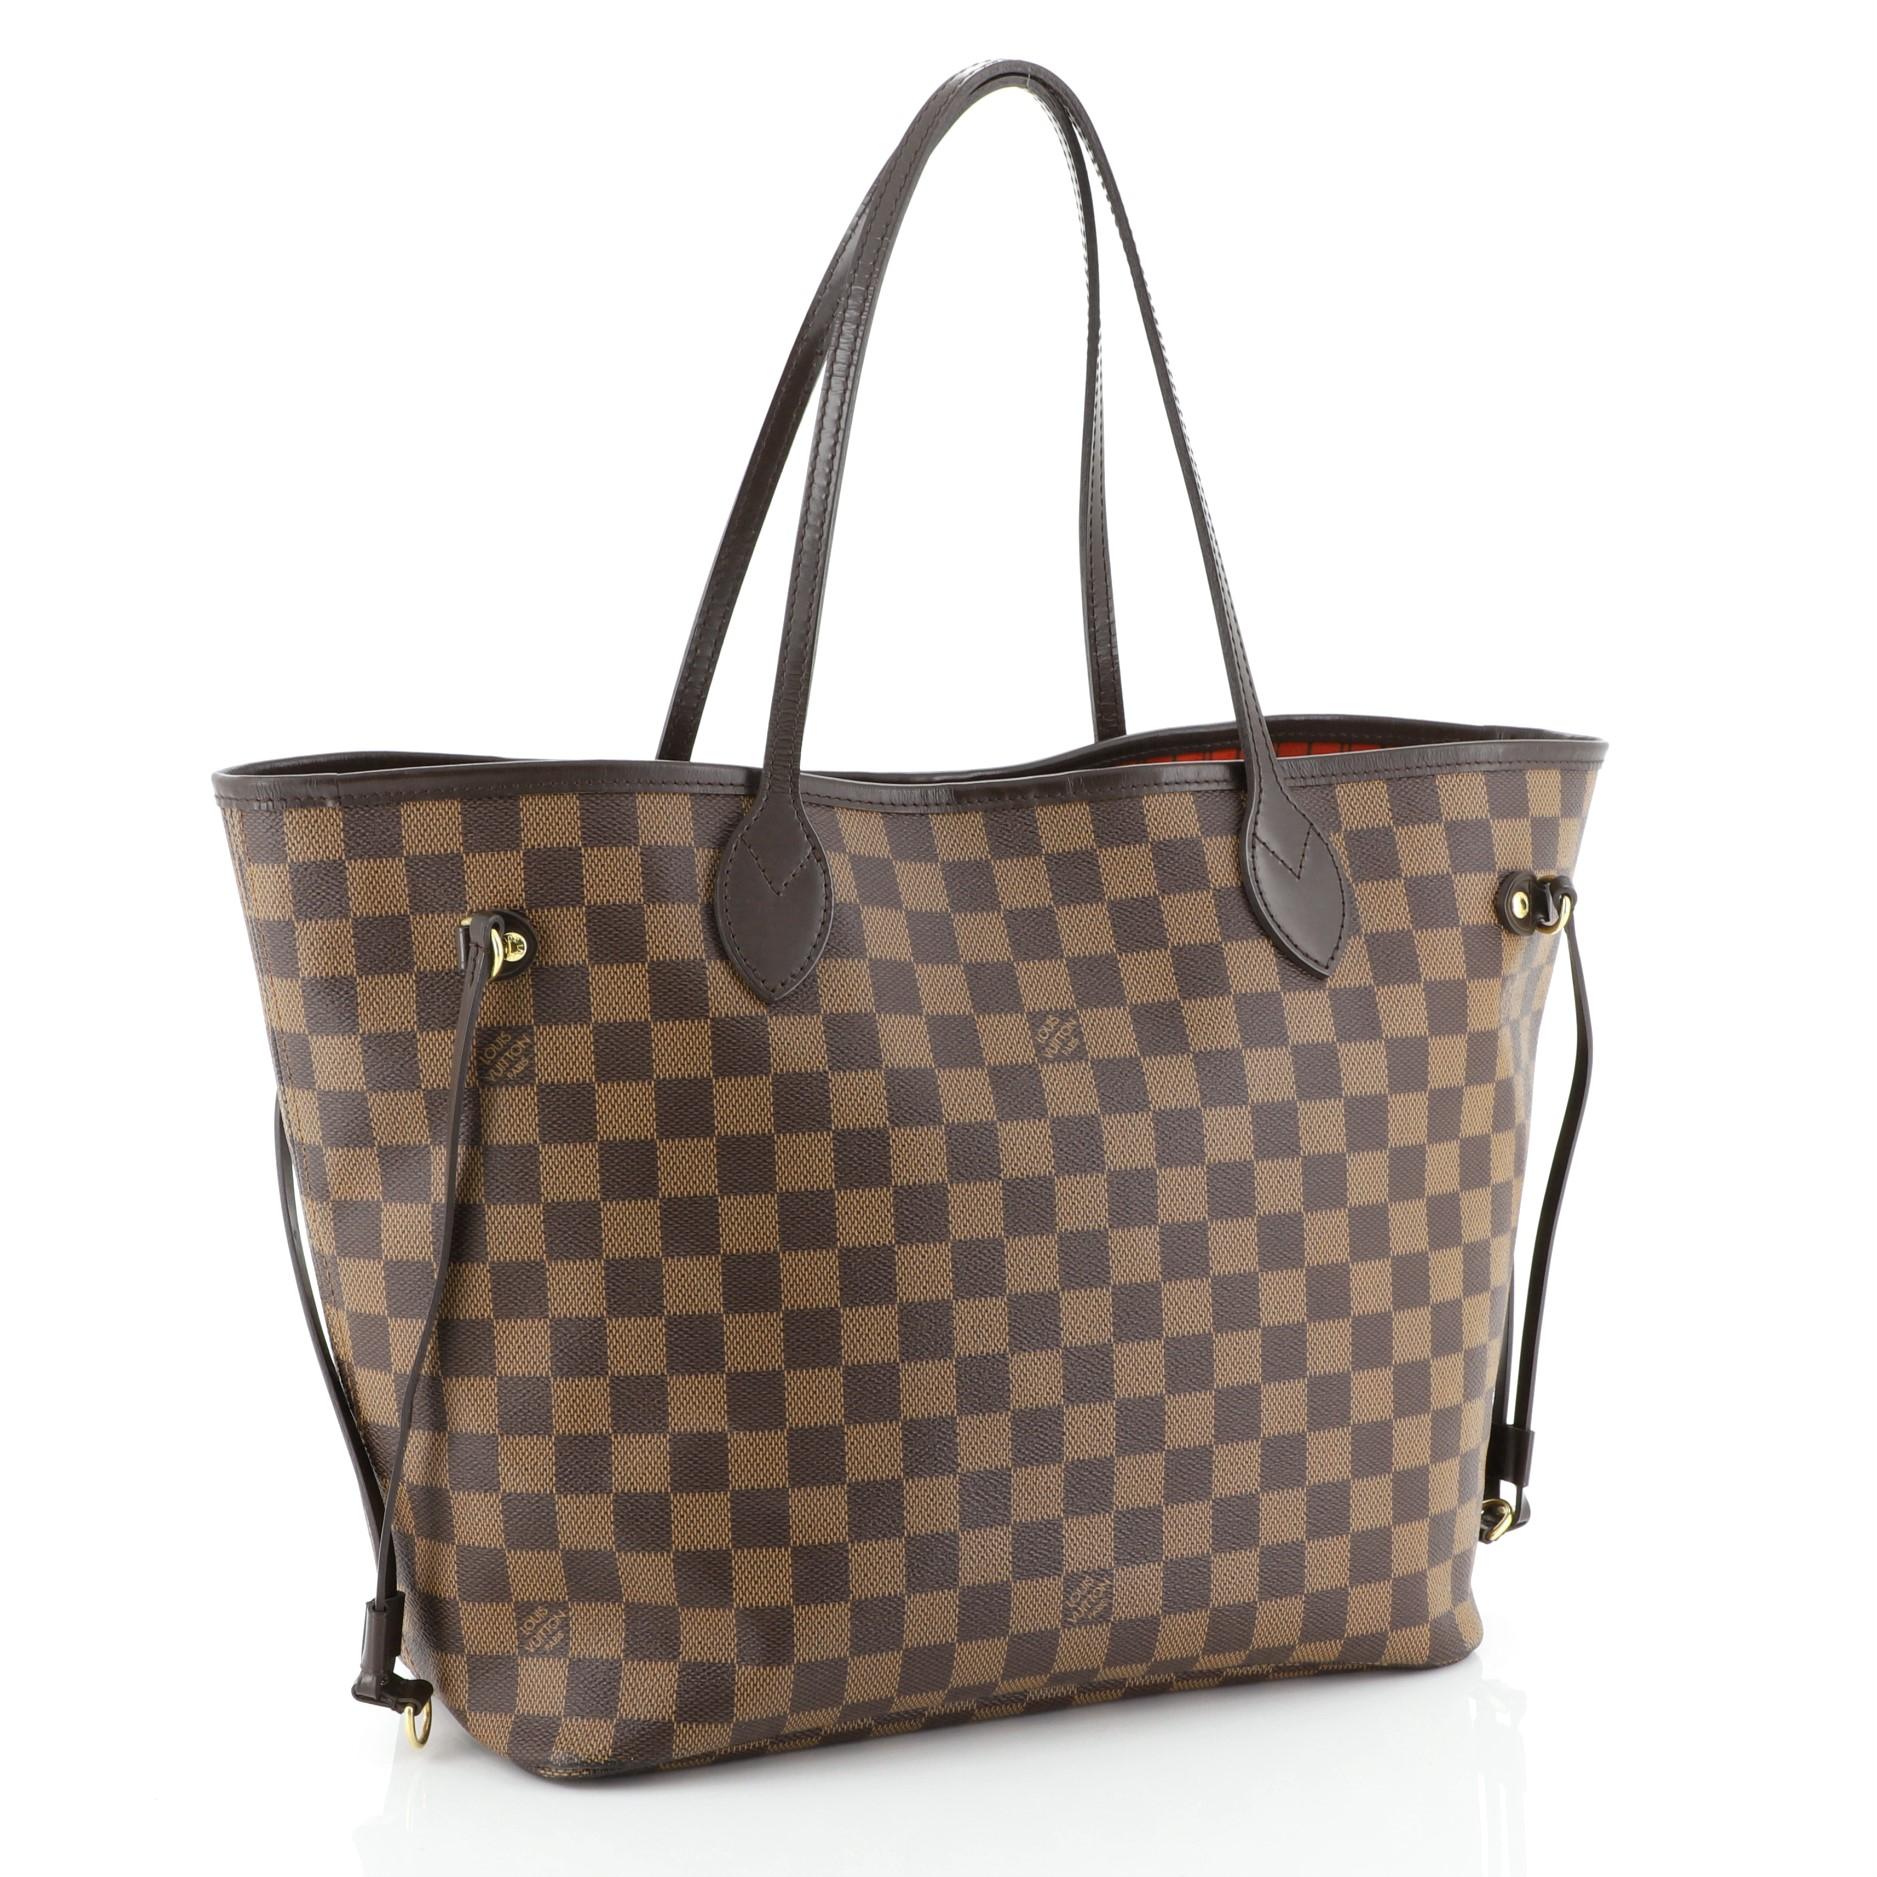 This Louis Vuitton Neverfull NM Tote Damier MM, crafted in damier ebene coated canvas, features dual slim handles, side laces, and gold-tone hardware. Its wide open top showcases a red fabric interior with side zip pocket. Authenticity code reads: